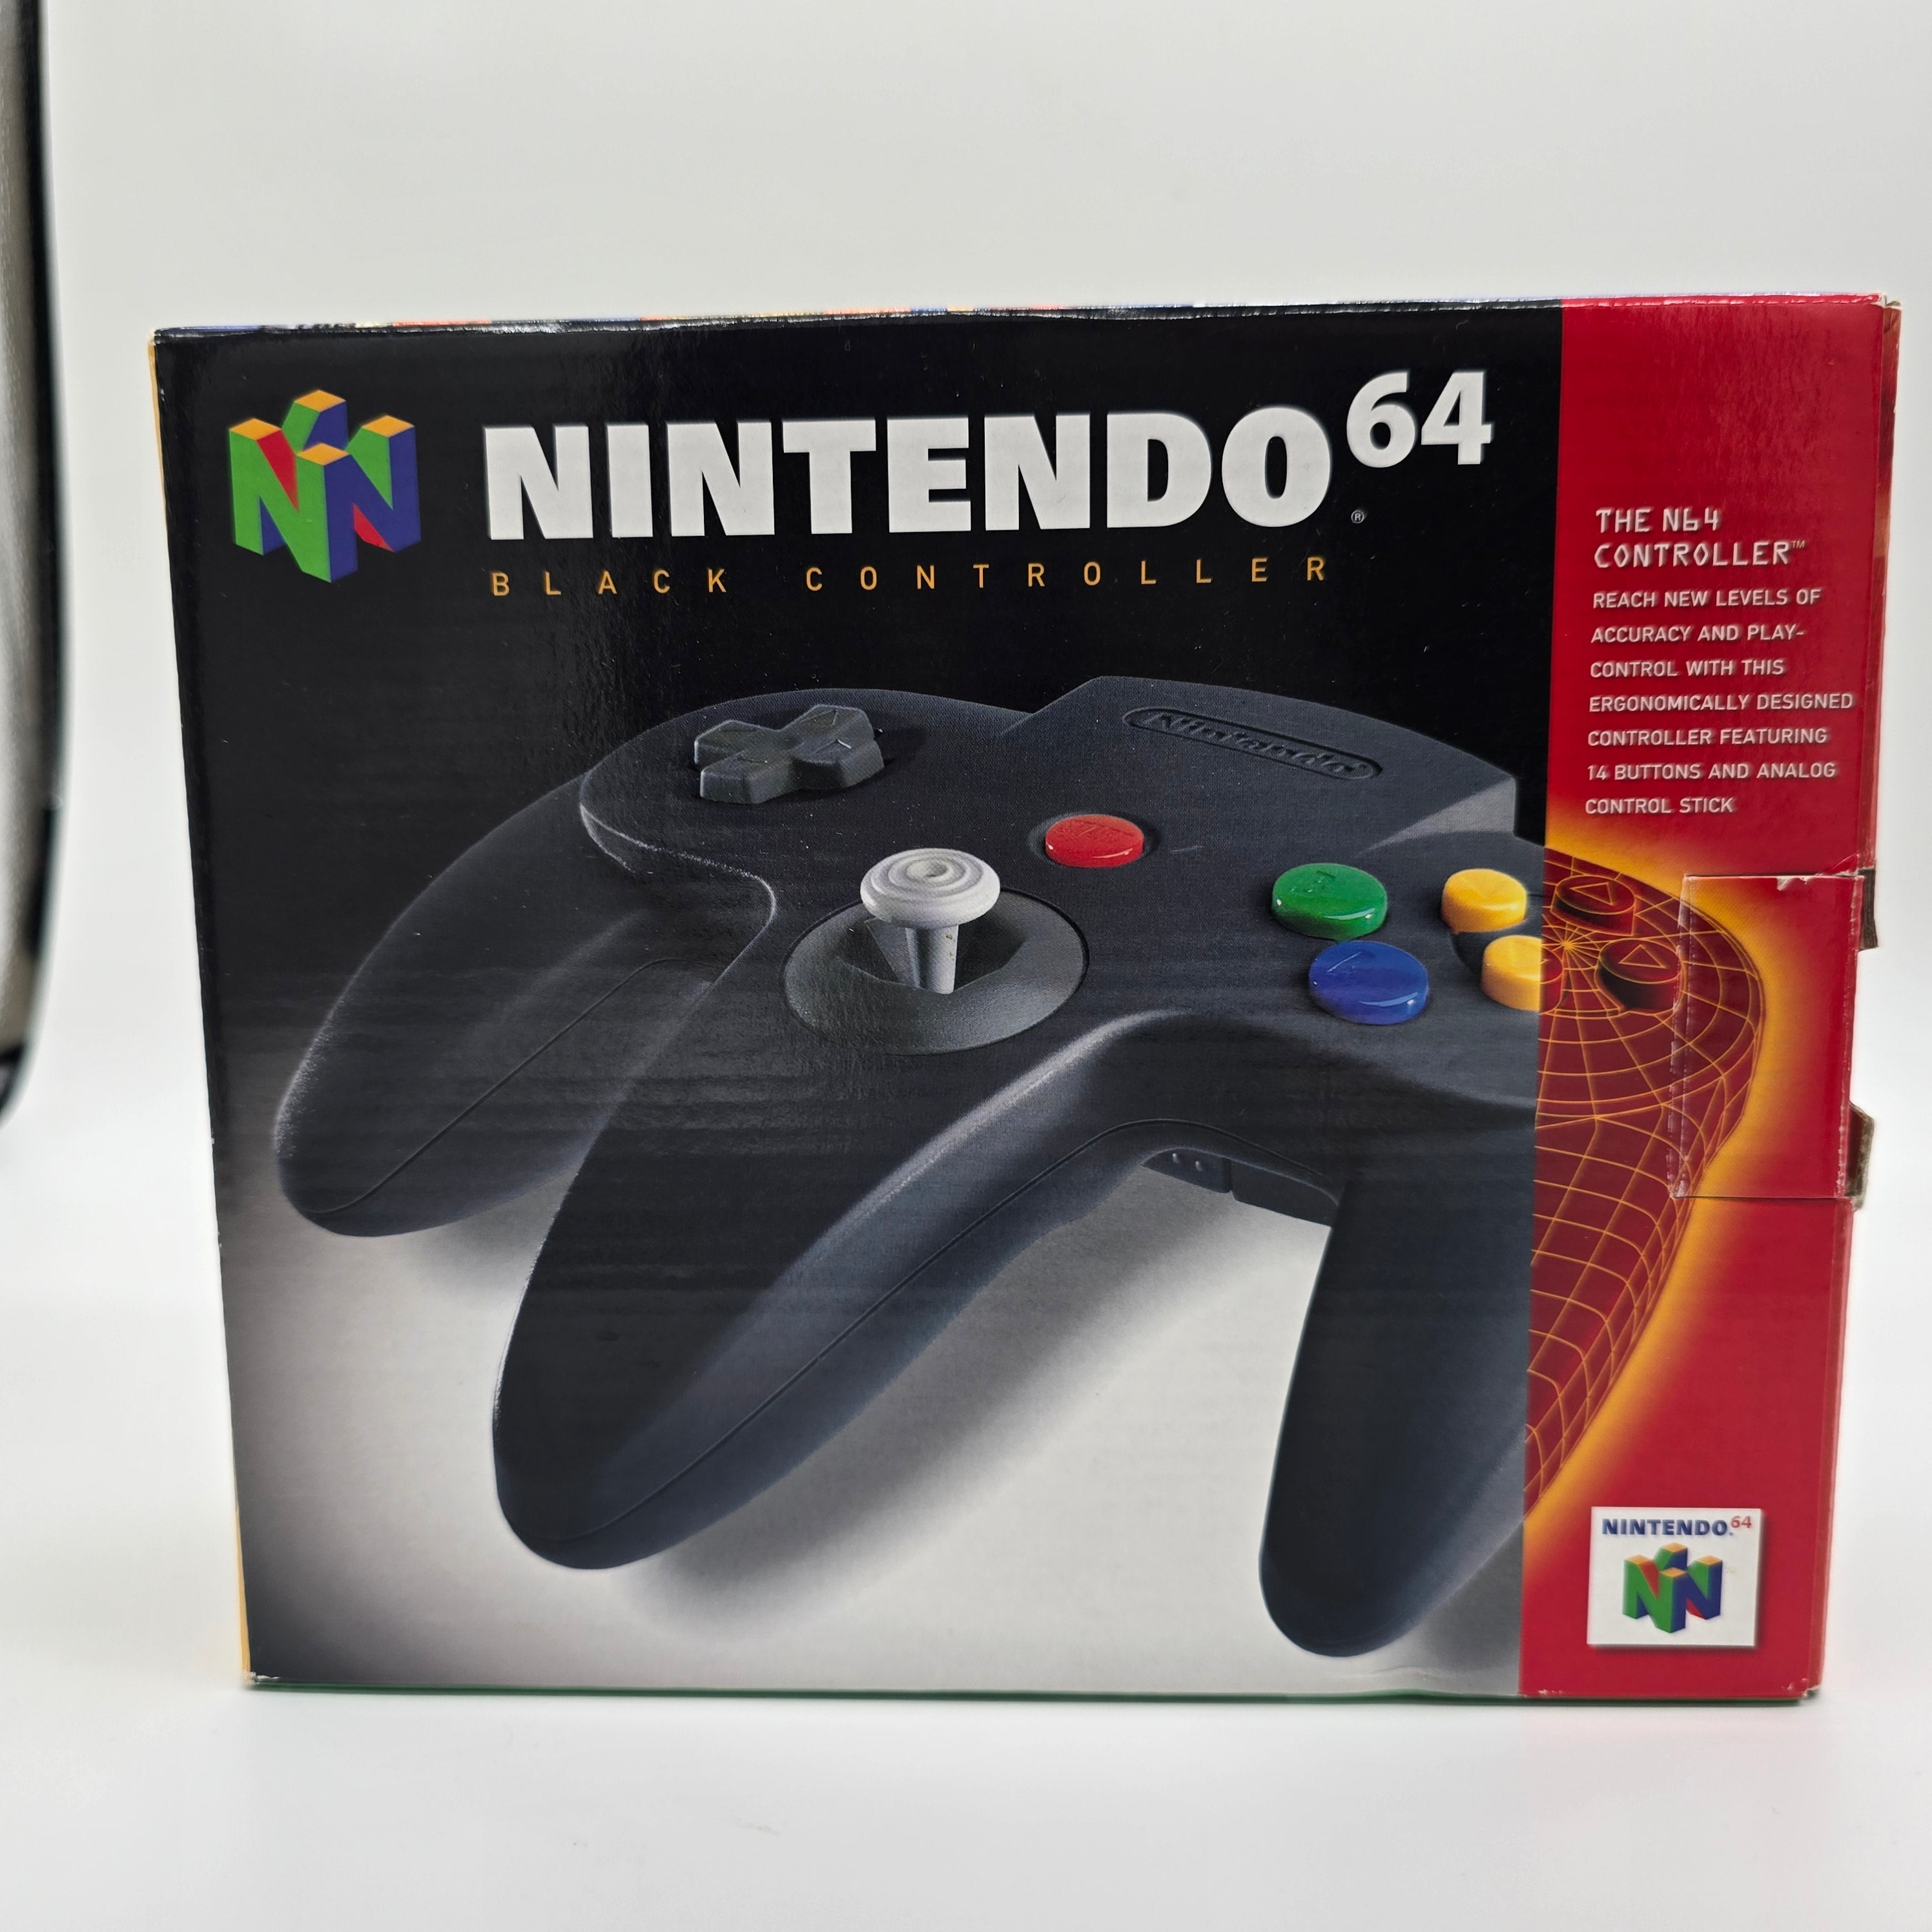 Nintendo N64 Charcoal Grey Controller with Box (NUS-005)